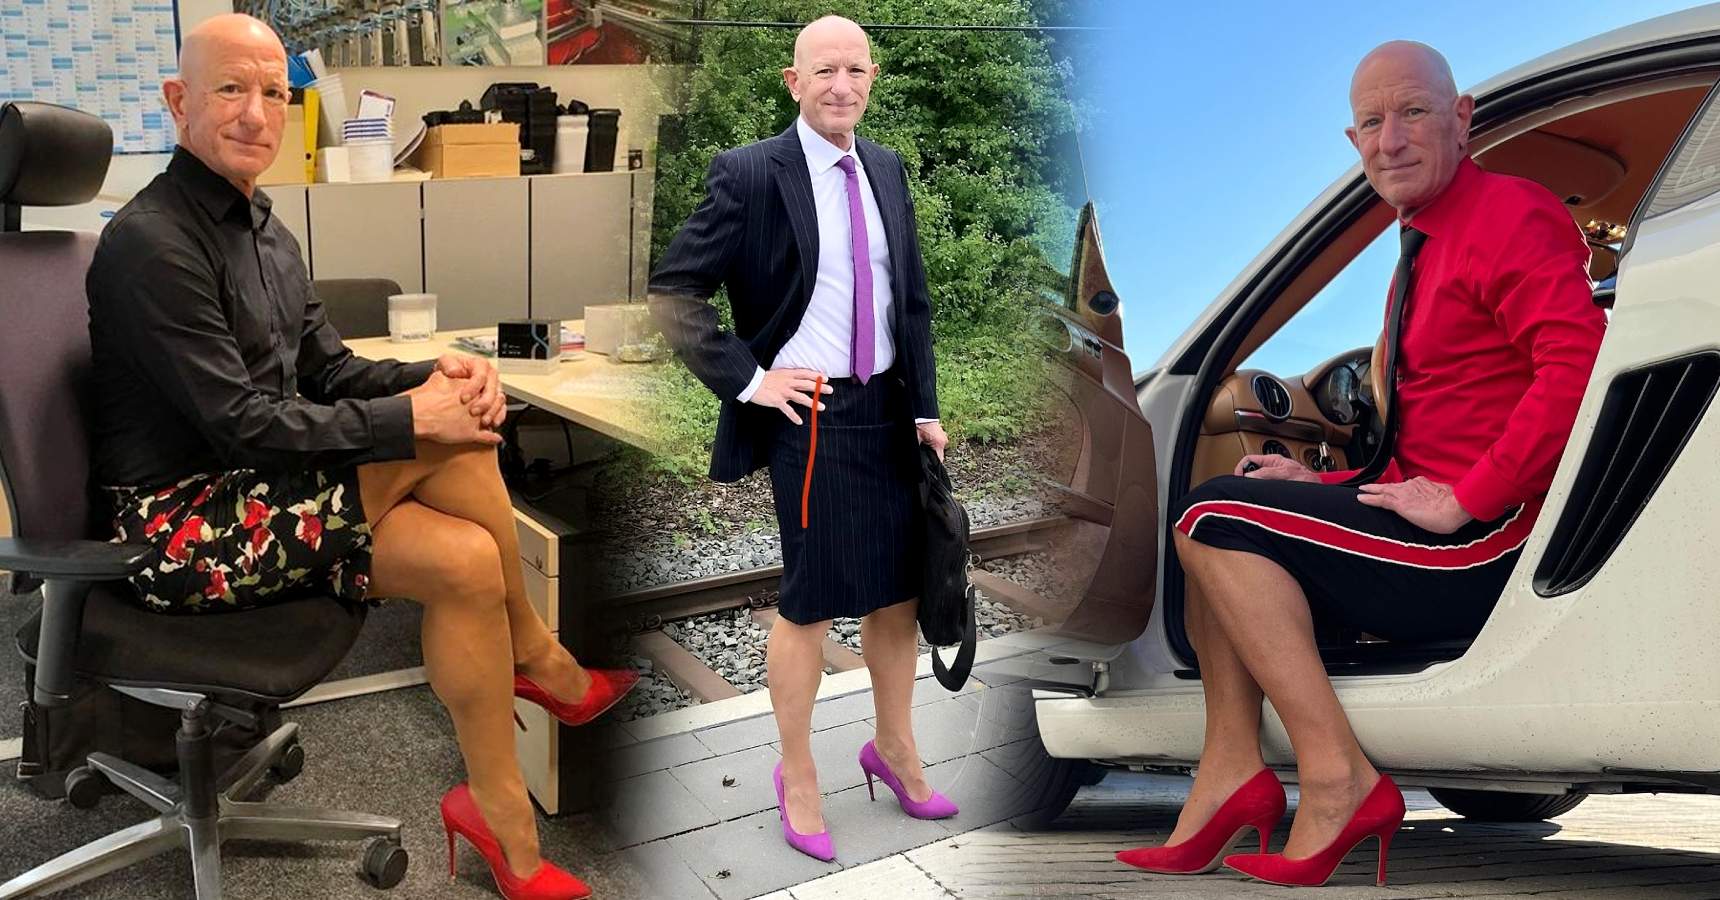 63 Year old Mark Bryan wears Skirt and Heels for going to office Photo goes viral